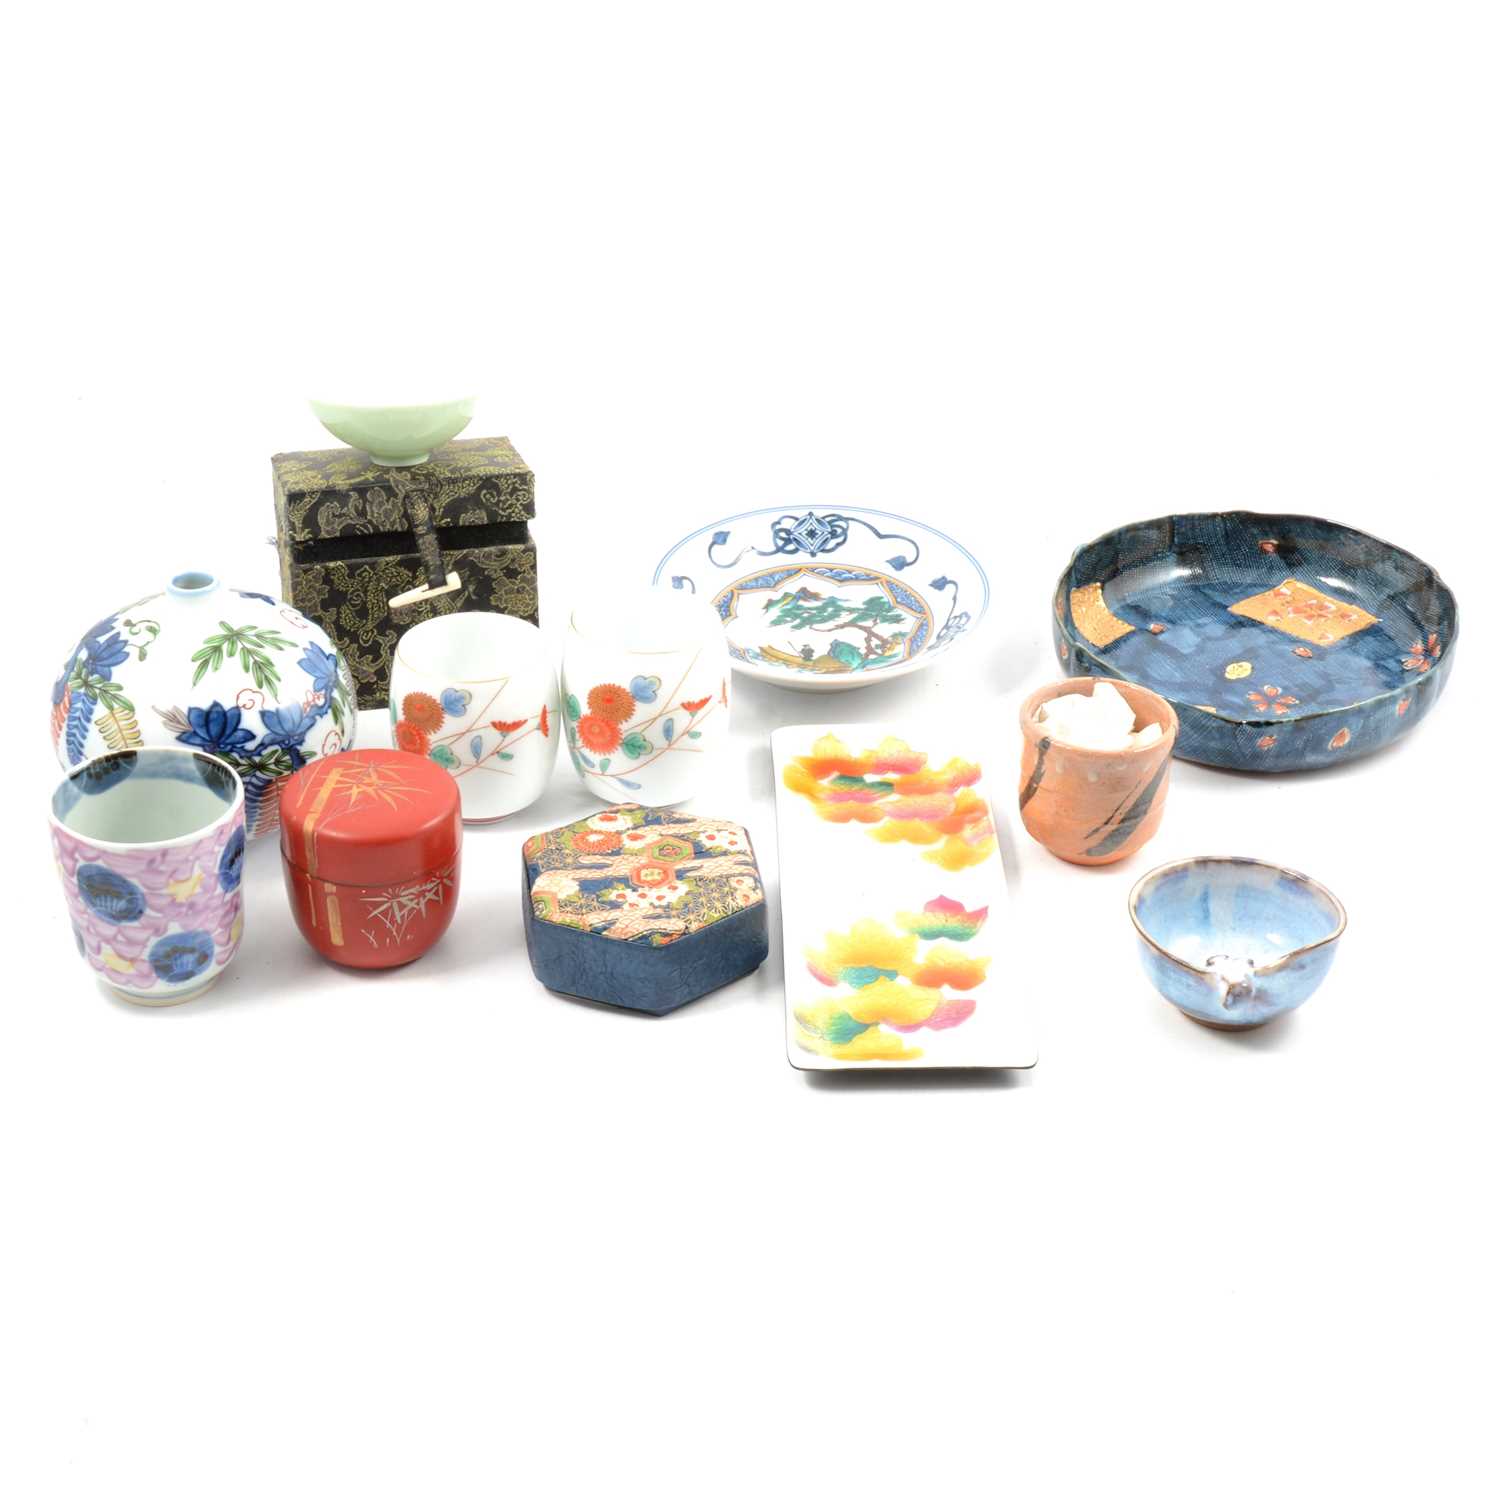 Lot 20 - Pair of Japanese porcelain beakers, other modern Japanese and Korean ceramics, and other artifacts.